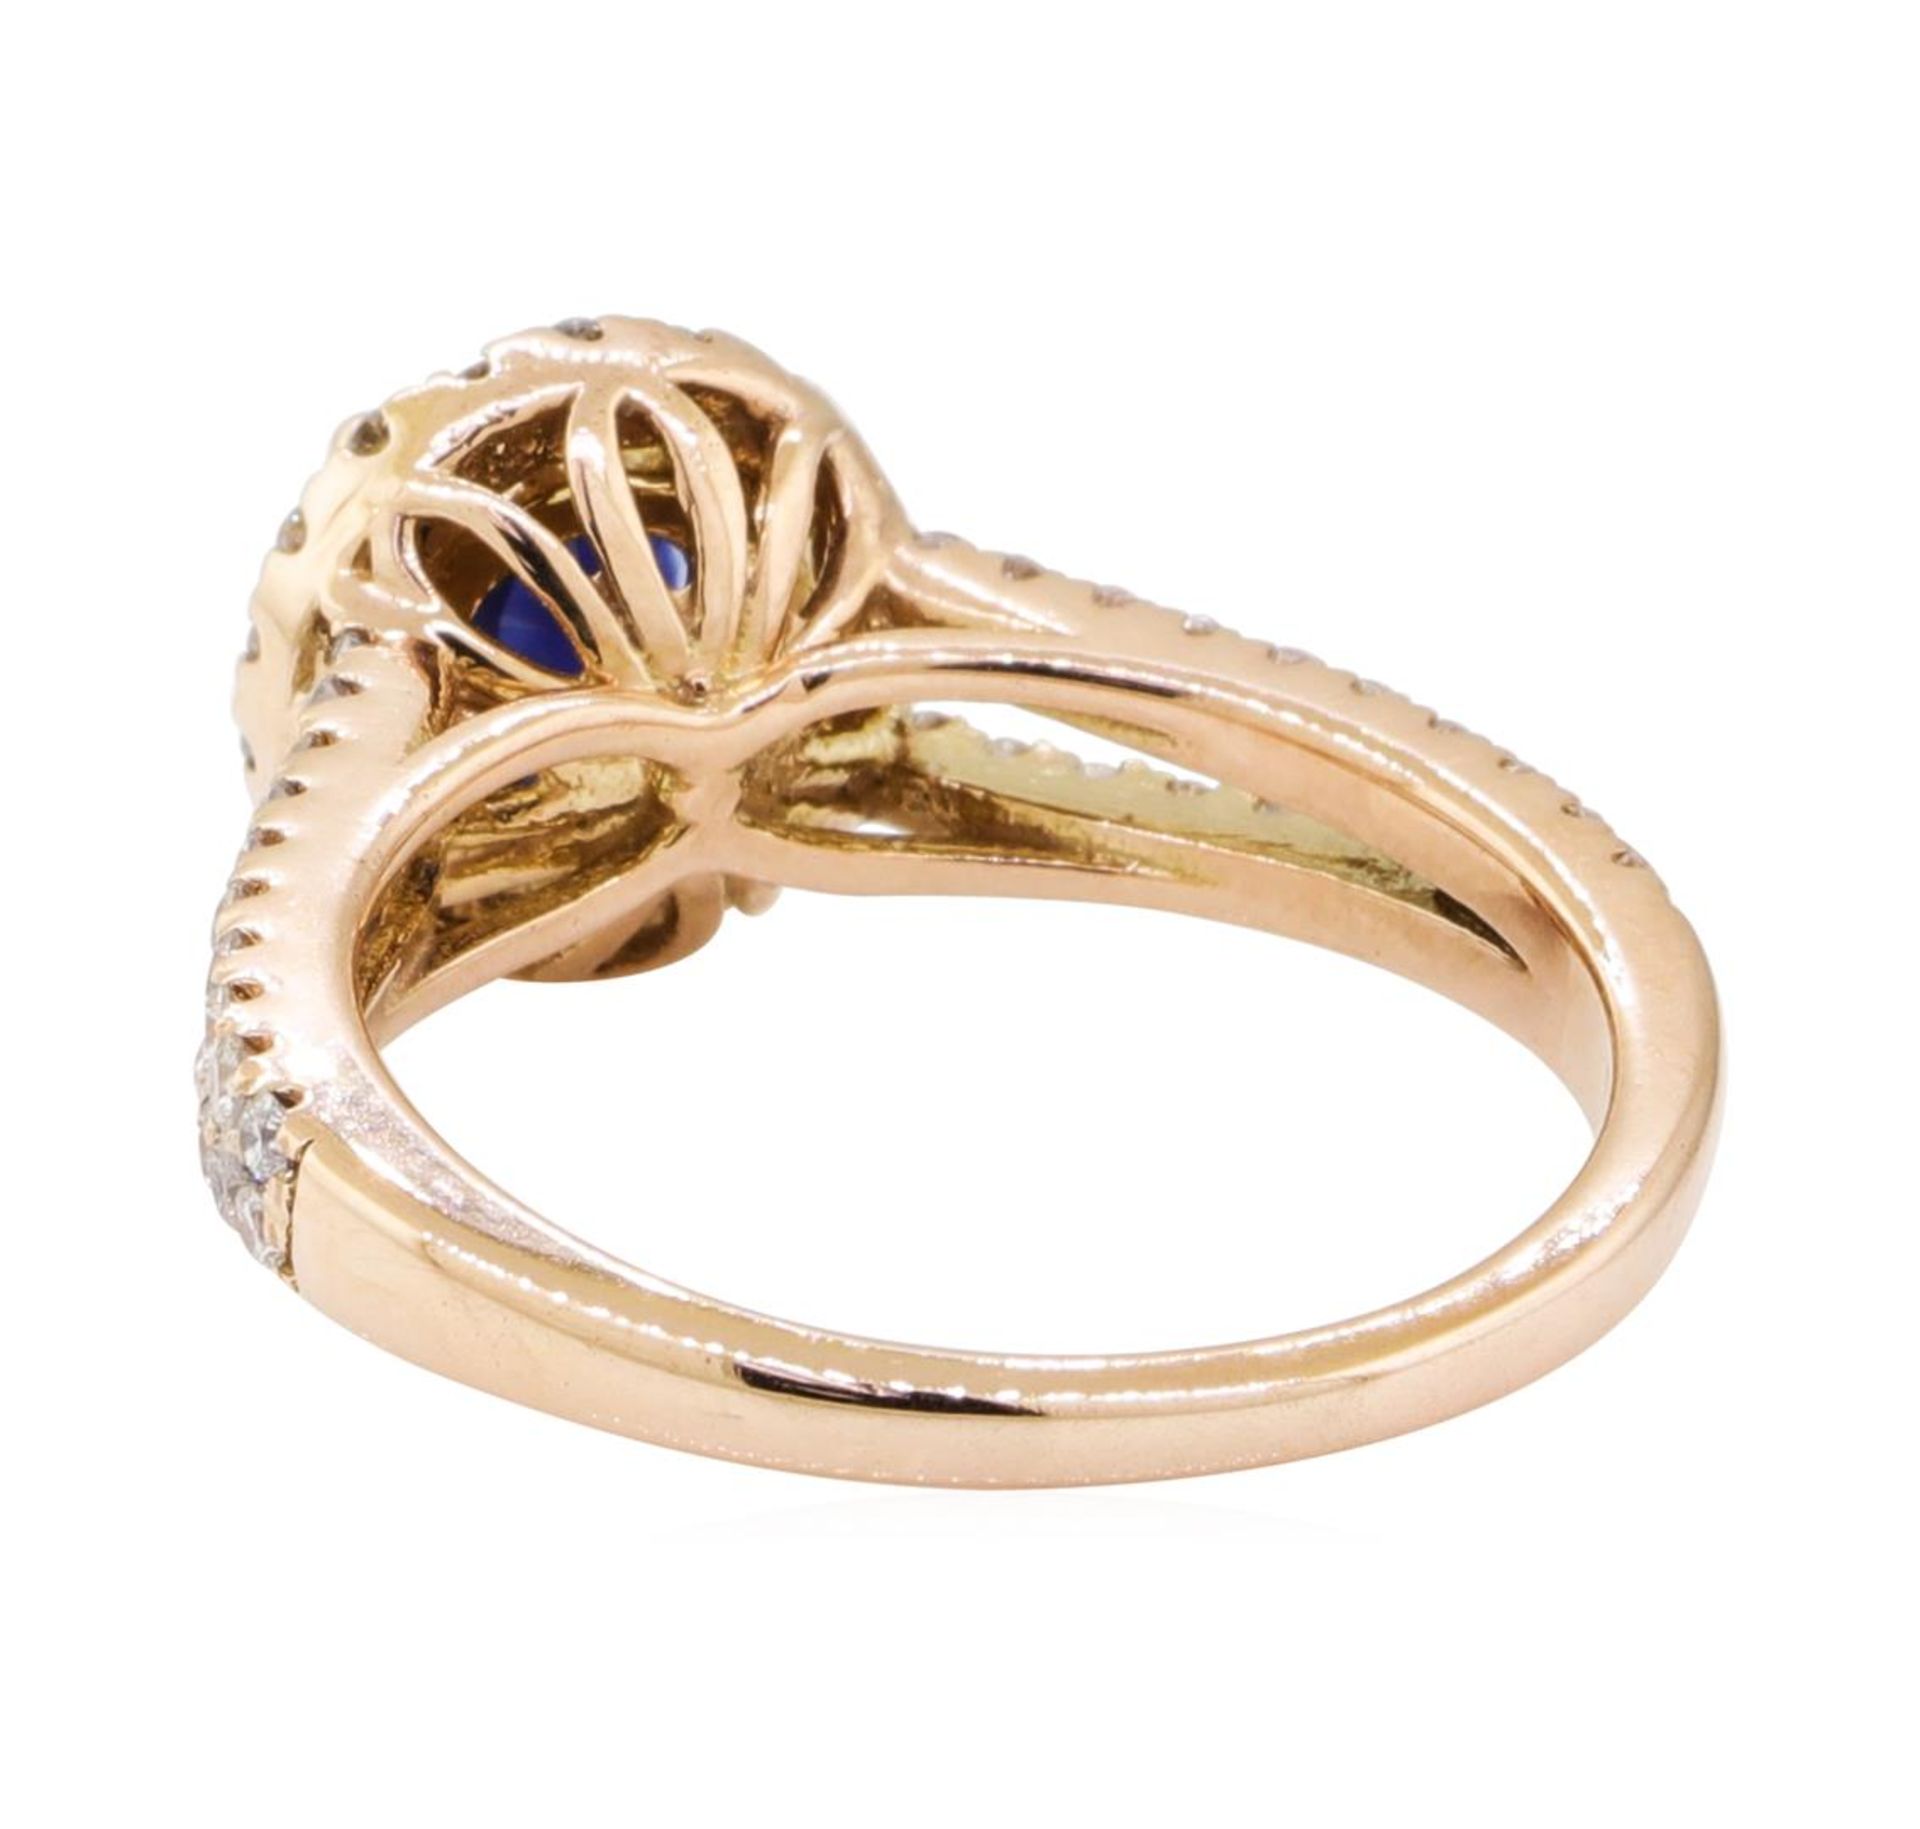 1.69 ctw Sapphire and Diamond Ring - 14KT Rose Gold - Image 3 of 5